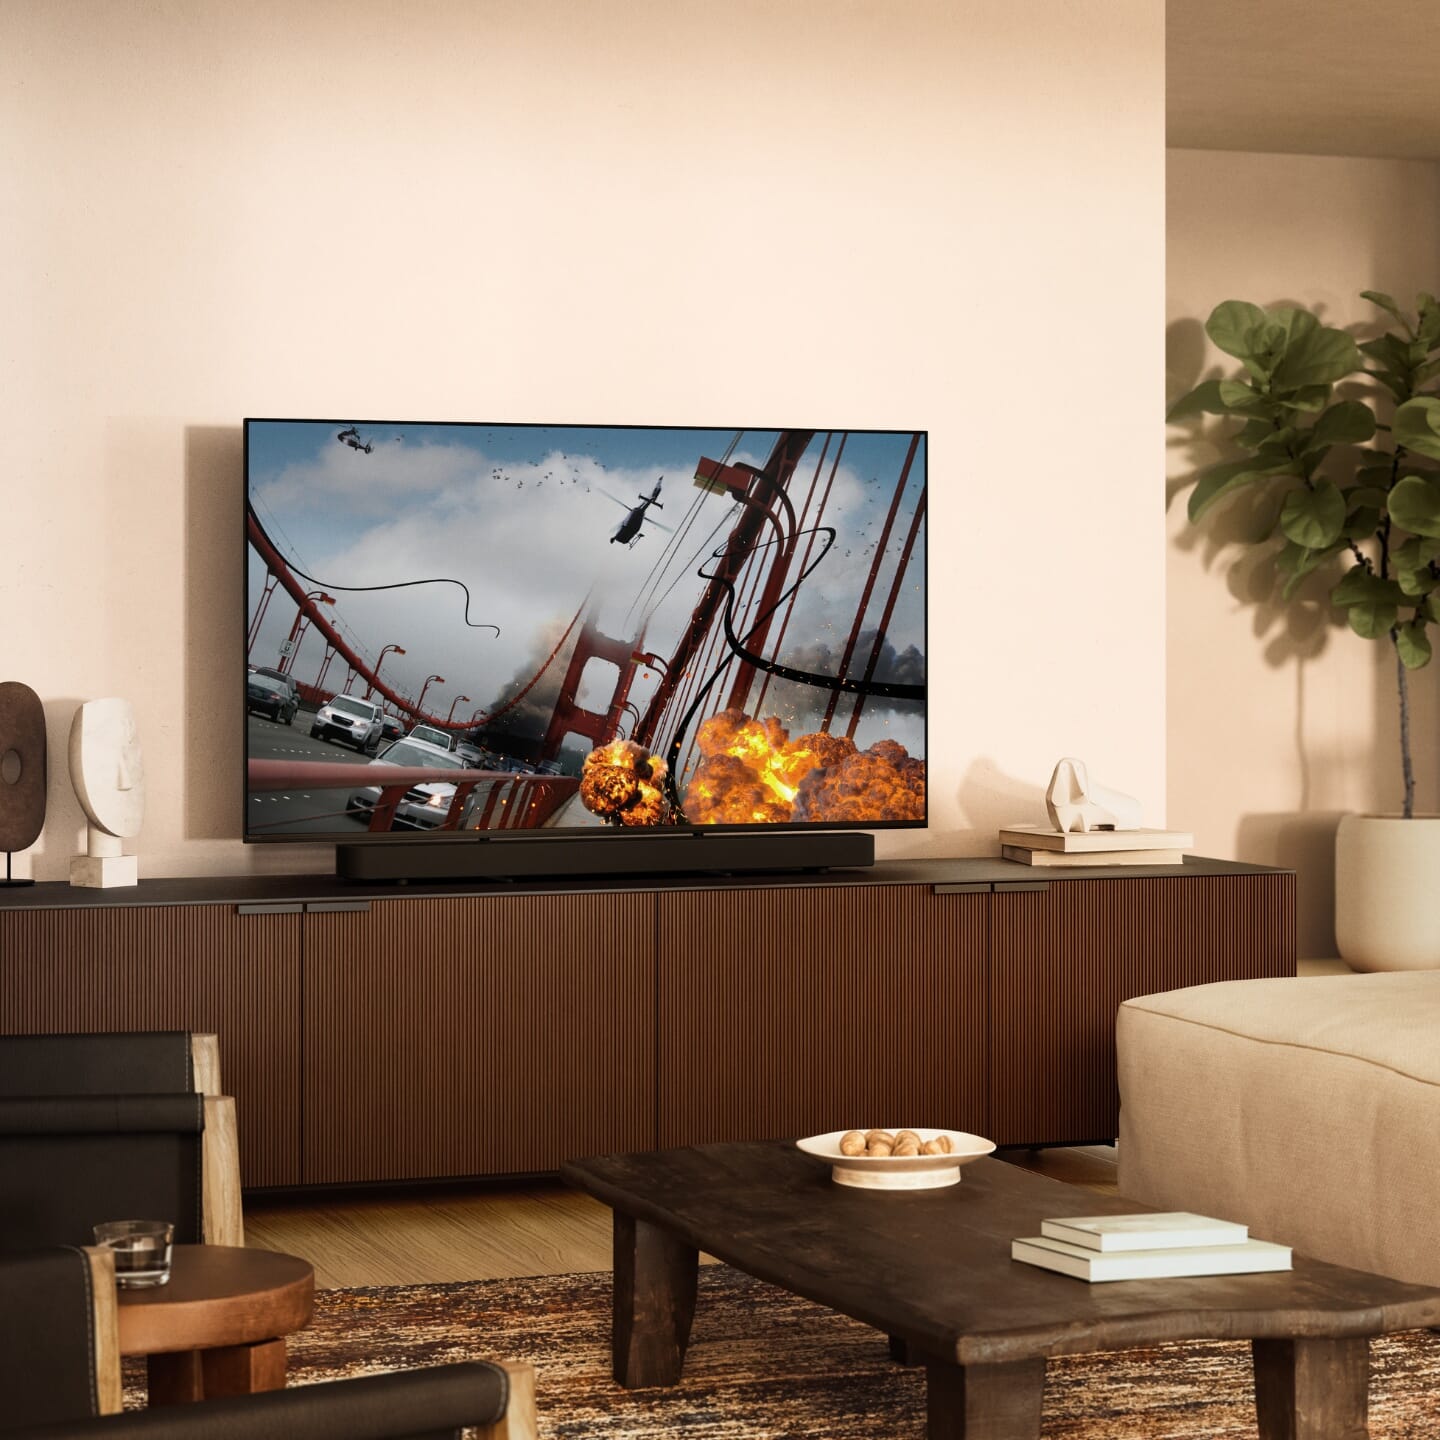 Create your dream home cinema setup and bring the movies to life in your very own living room.